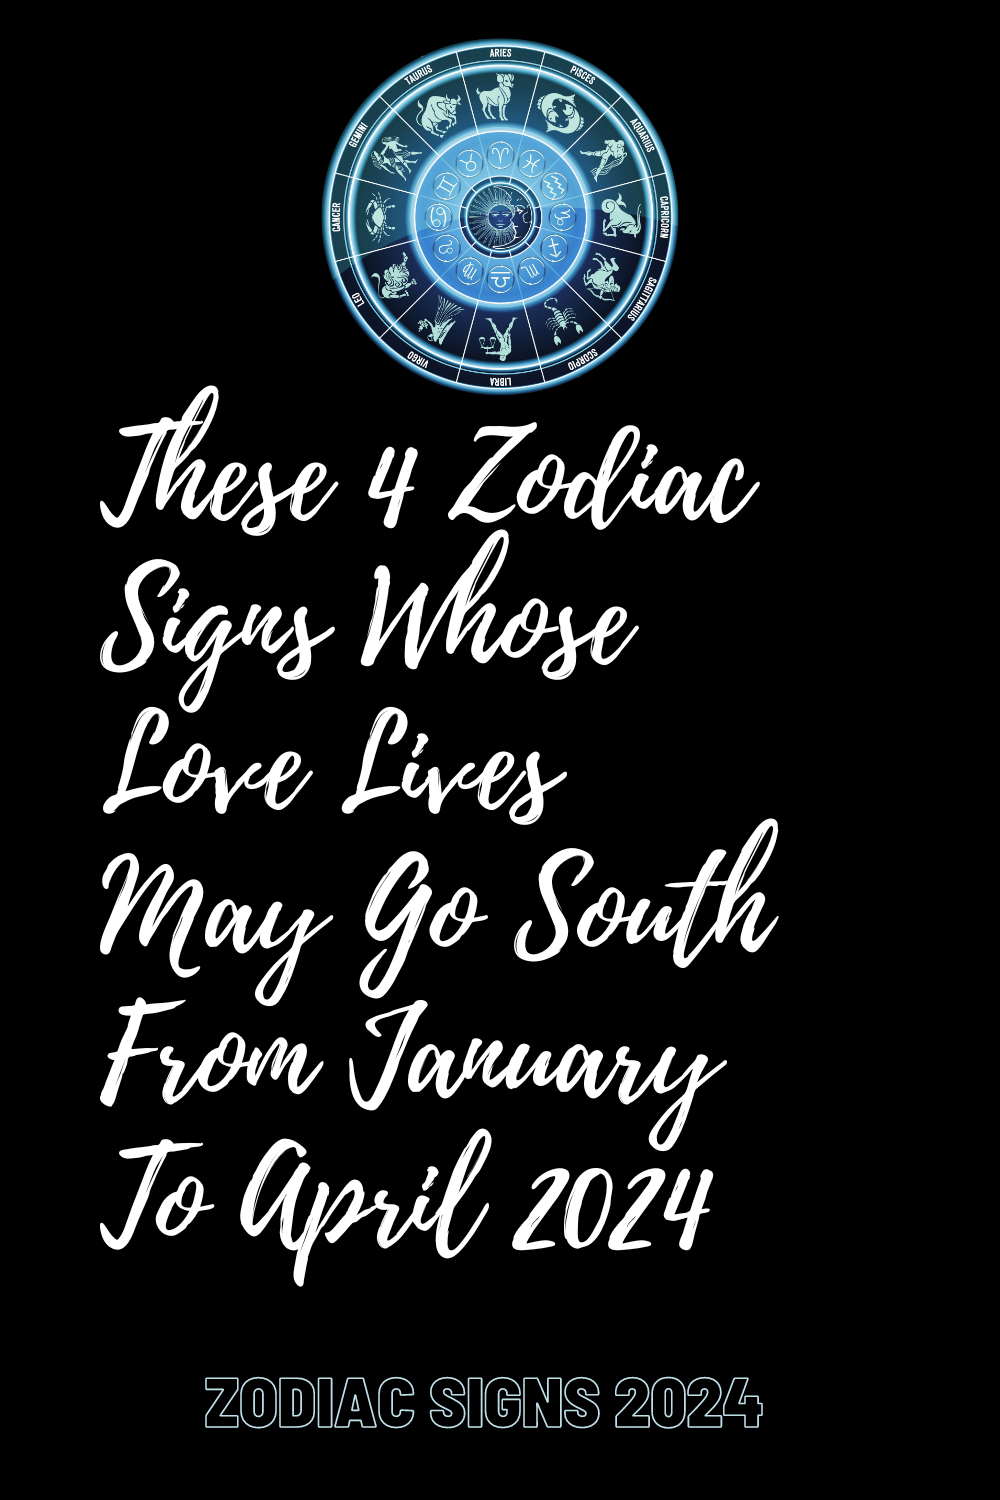 These 4 Zodiac Signs Whose Love Lives May Go South From January To April 2024